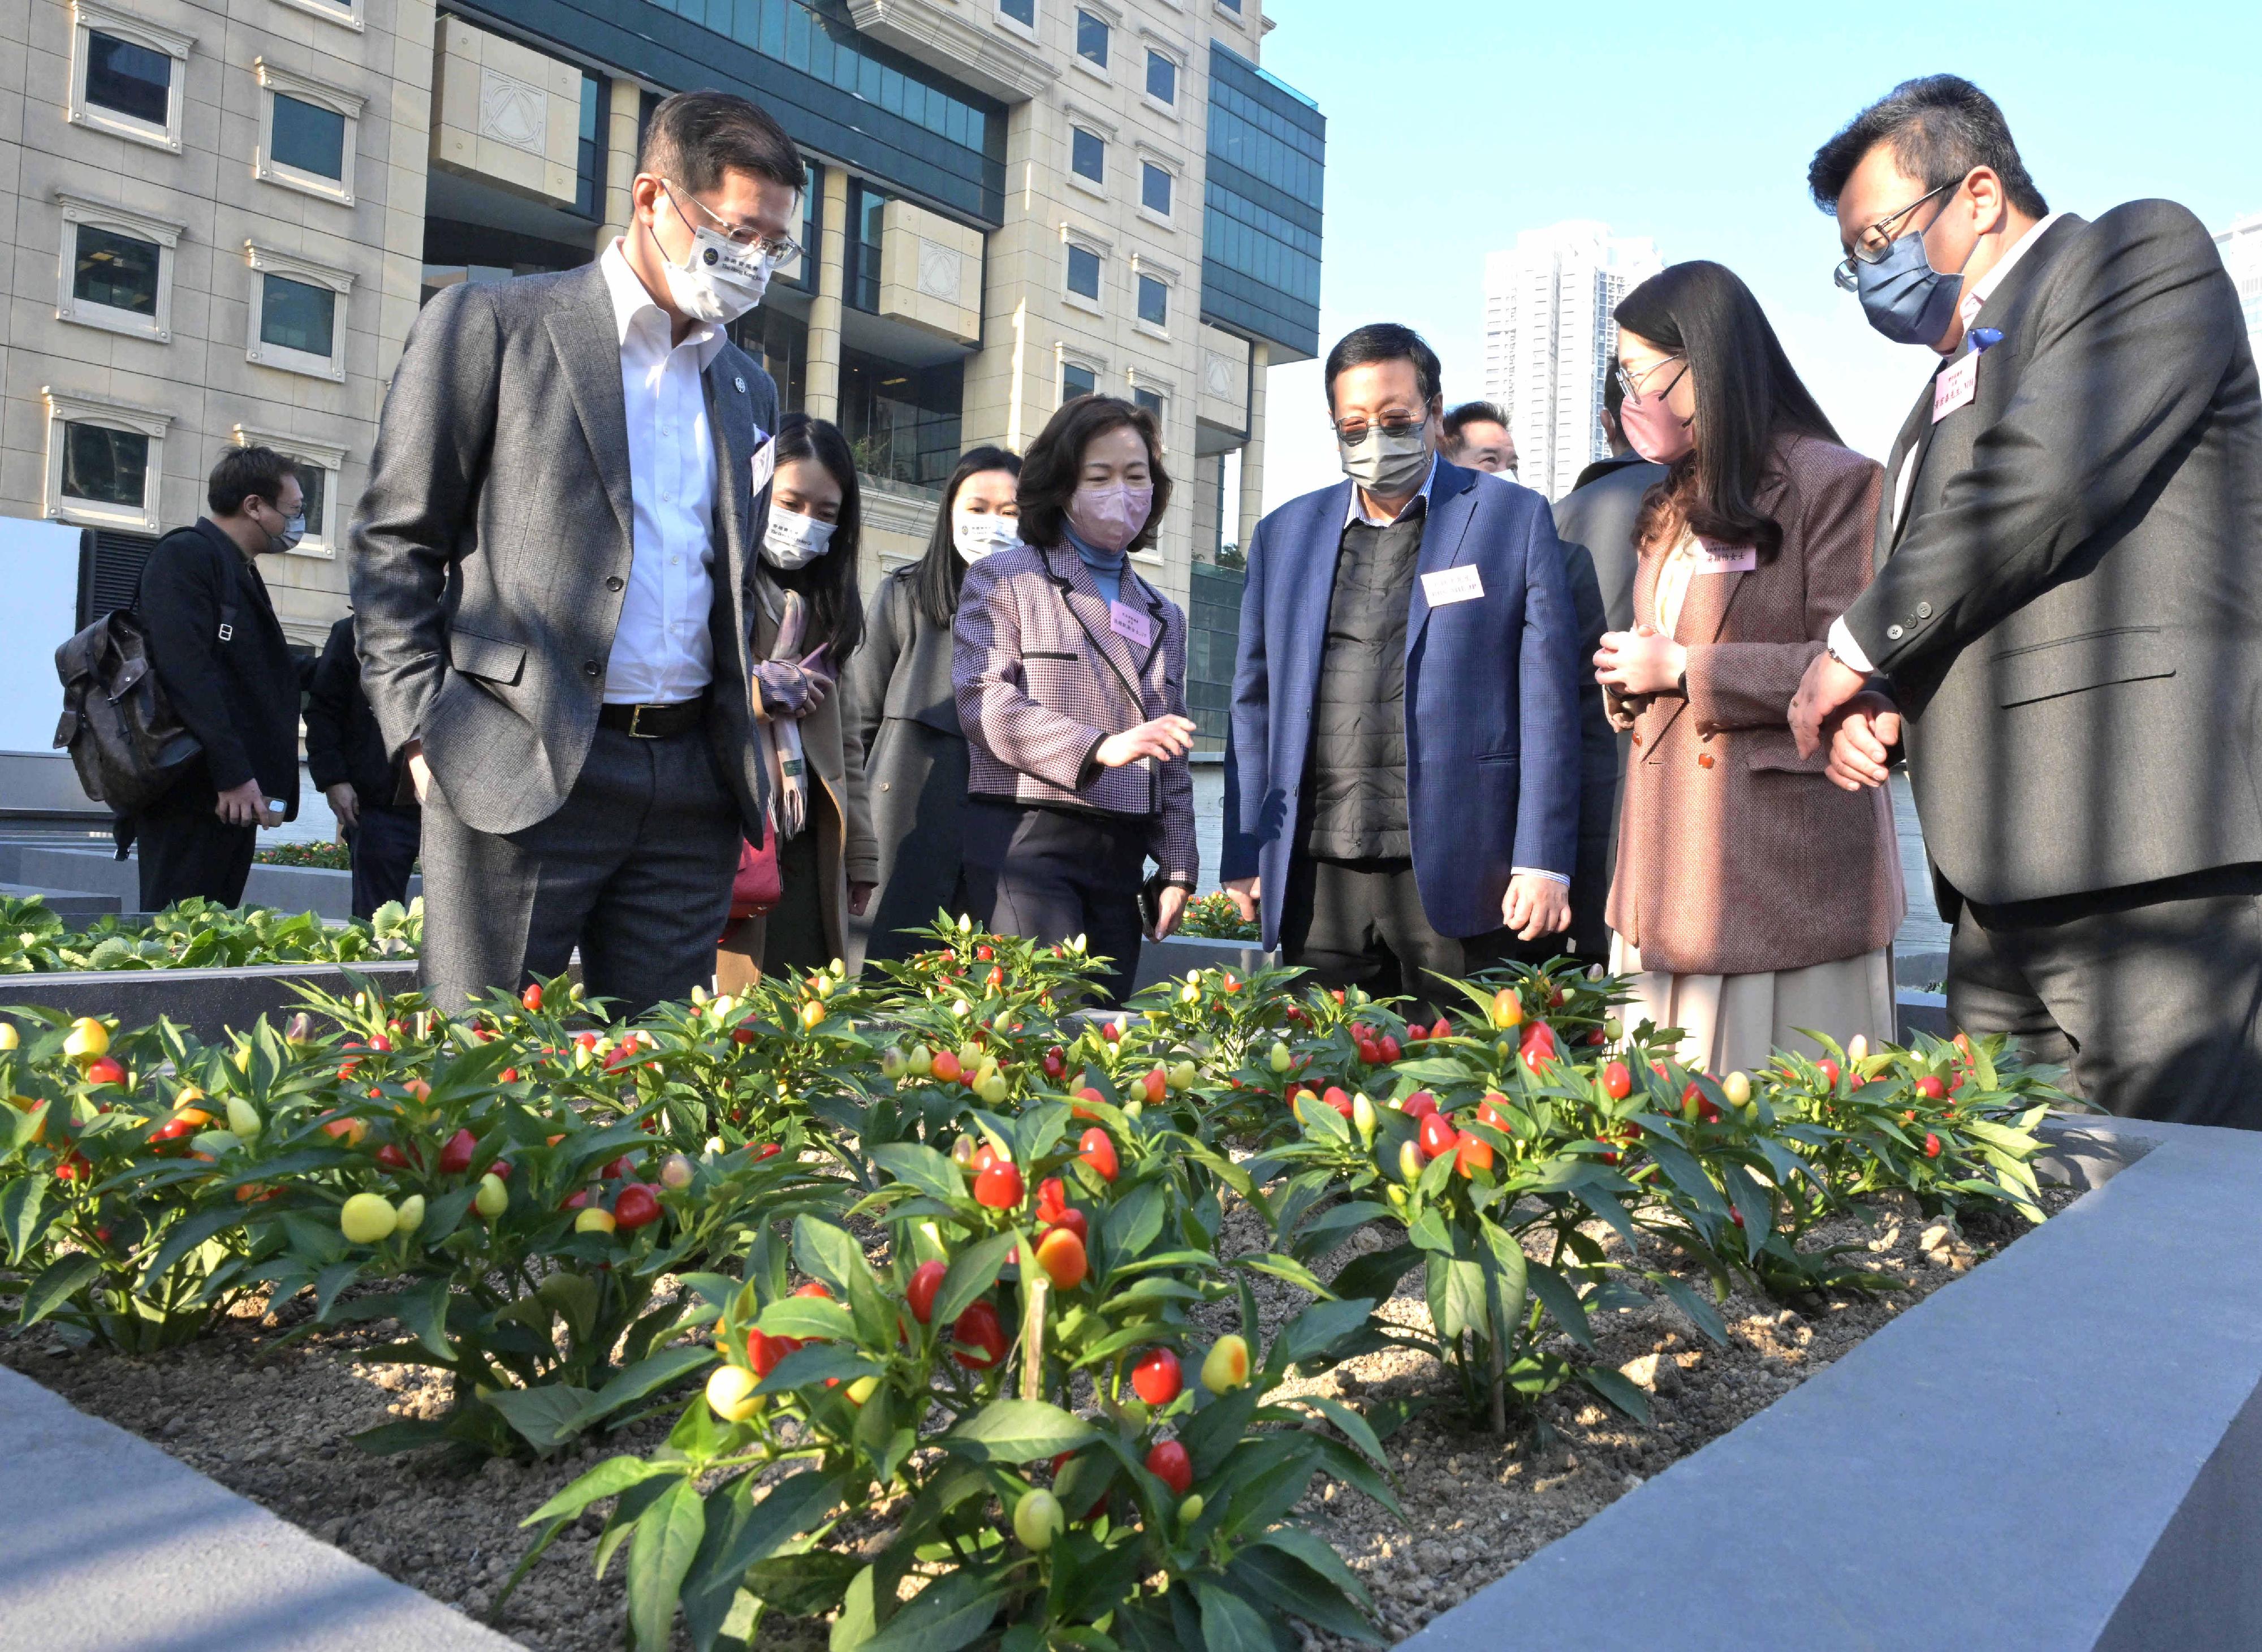 The opening ceremony for the Moreton Terrace Activities Centre under Wan Chai Signature Project Scheme was held today (December 29). Photo shows the Director of Home Affairs, Mrs Alice Cheung (second left, first row), touring the community garden cum rooftop garden with other officiating guests.